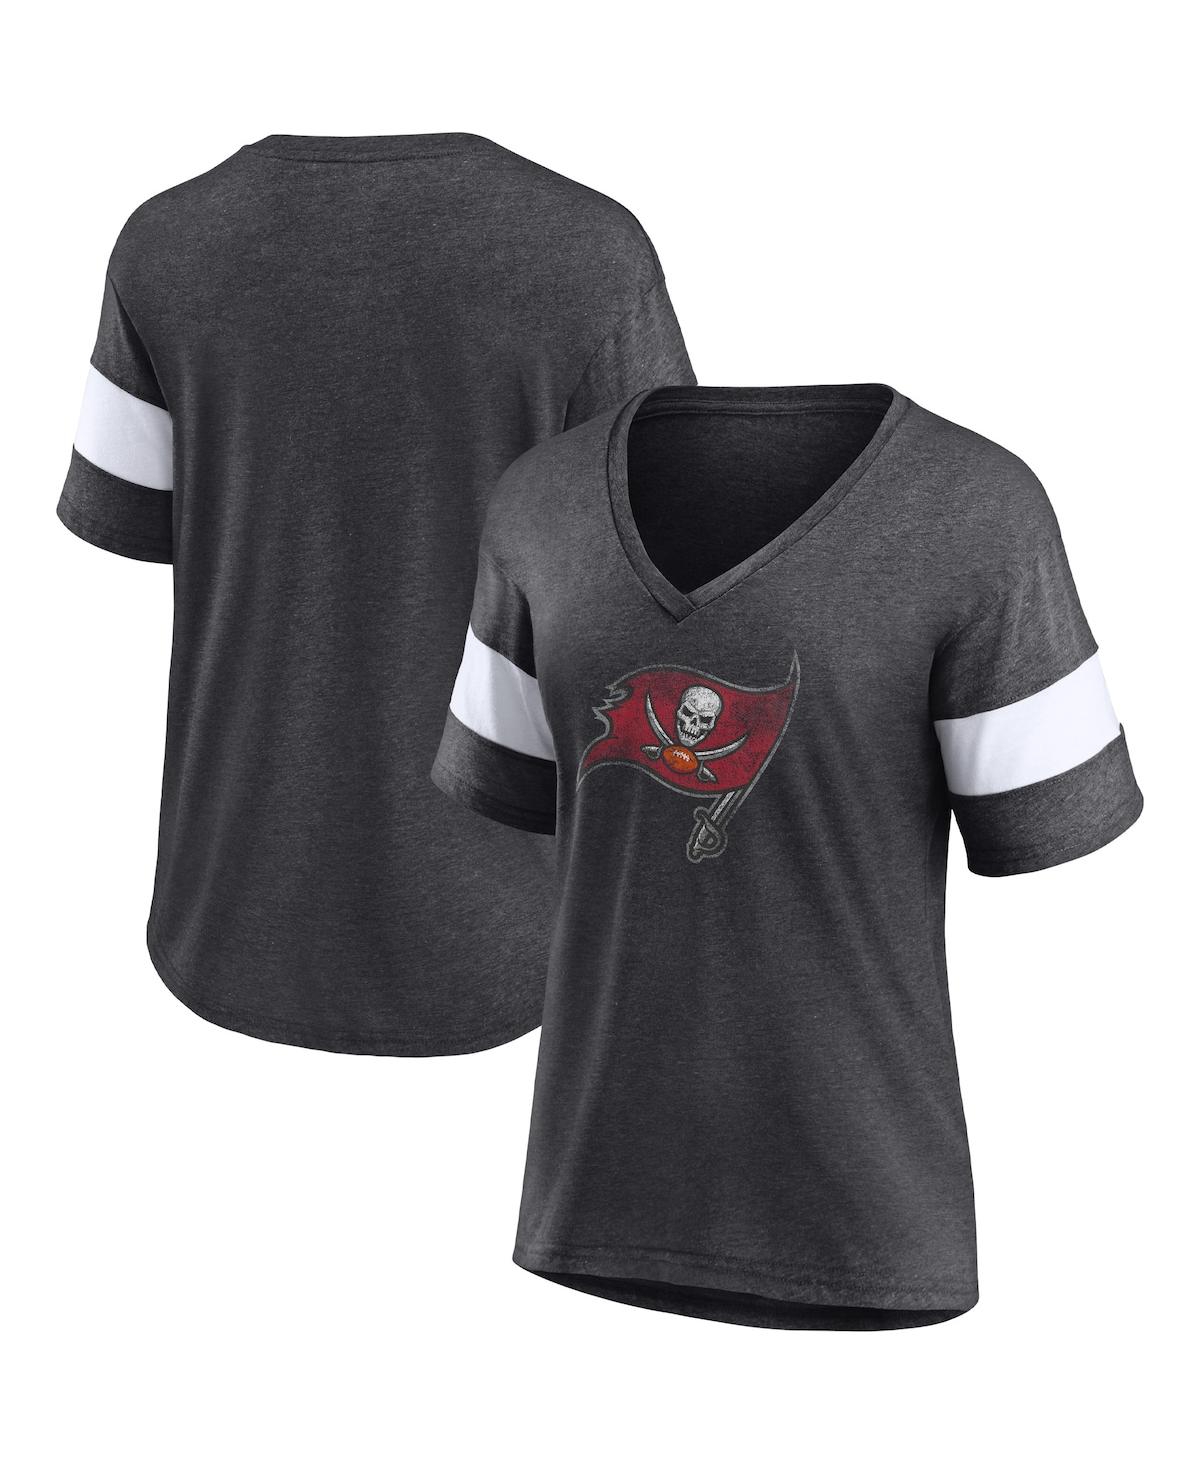 Fanatics Women's  Heathered Charcoal, White Tampa Bay Buccaneers Distressed Team Tri-blend V-neck T-s In Heathered Charcoal,white